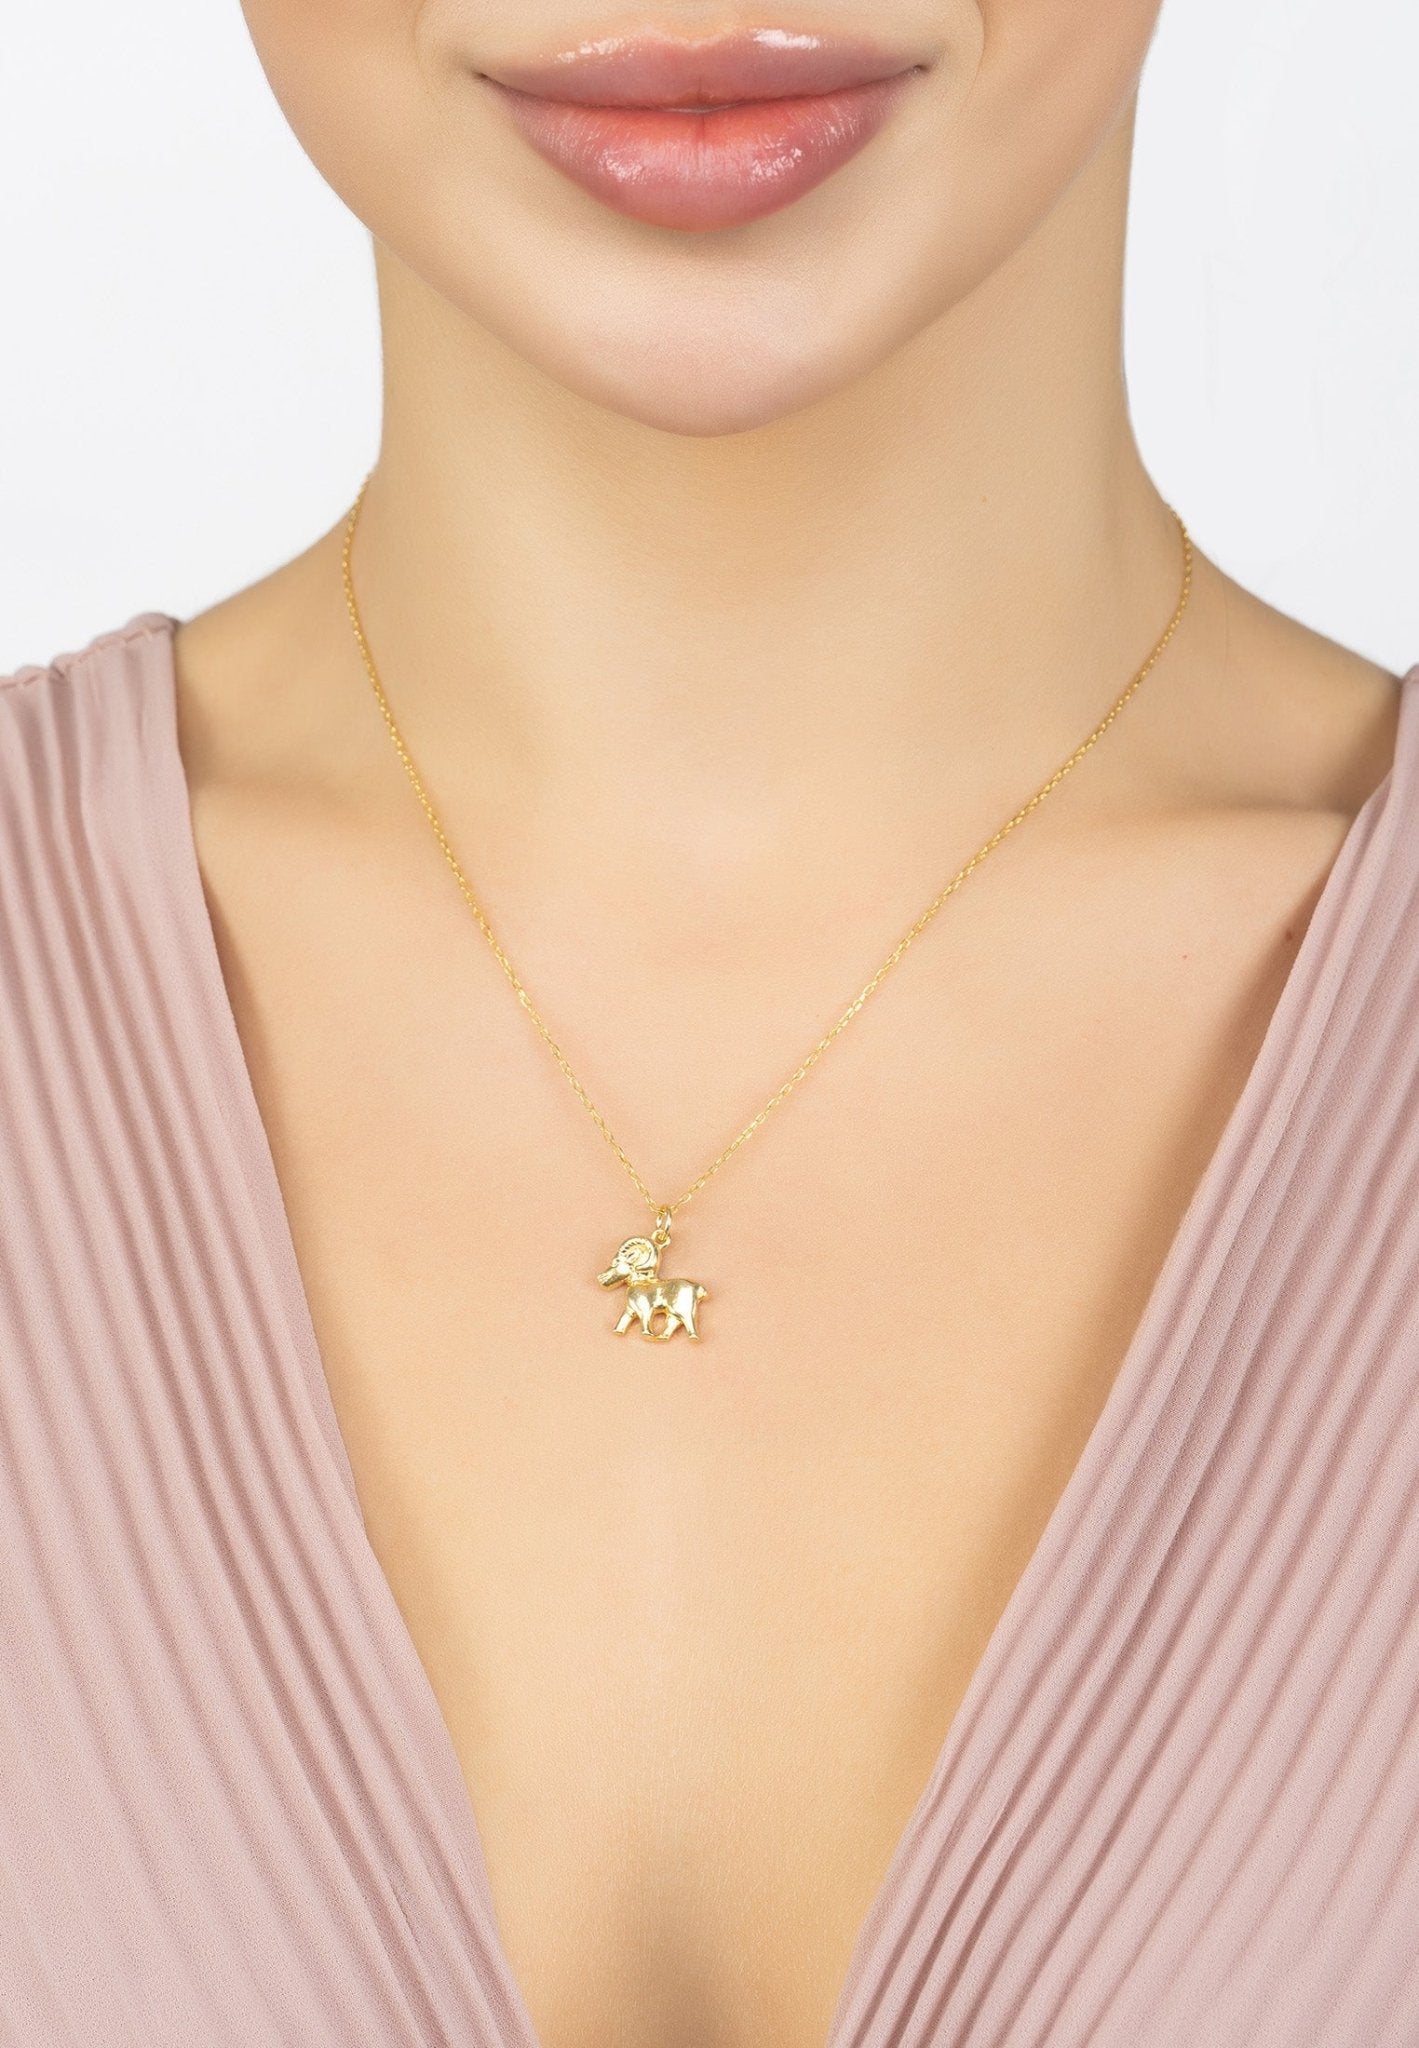 Zodiac Star Sign Necklace Gold Aries